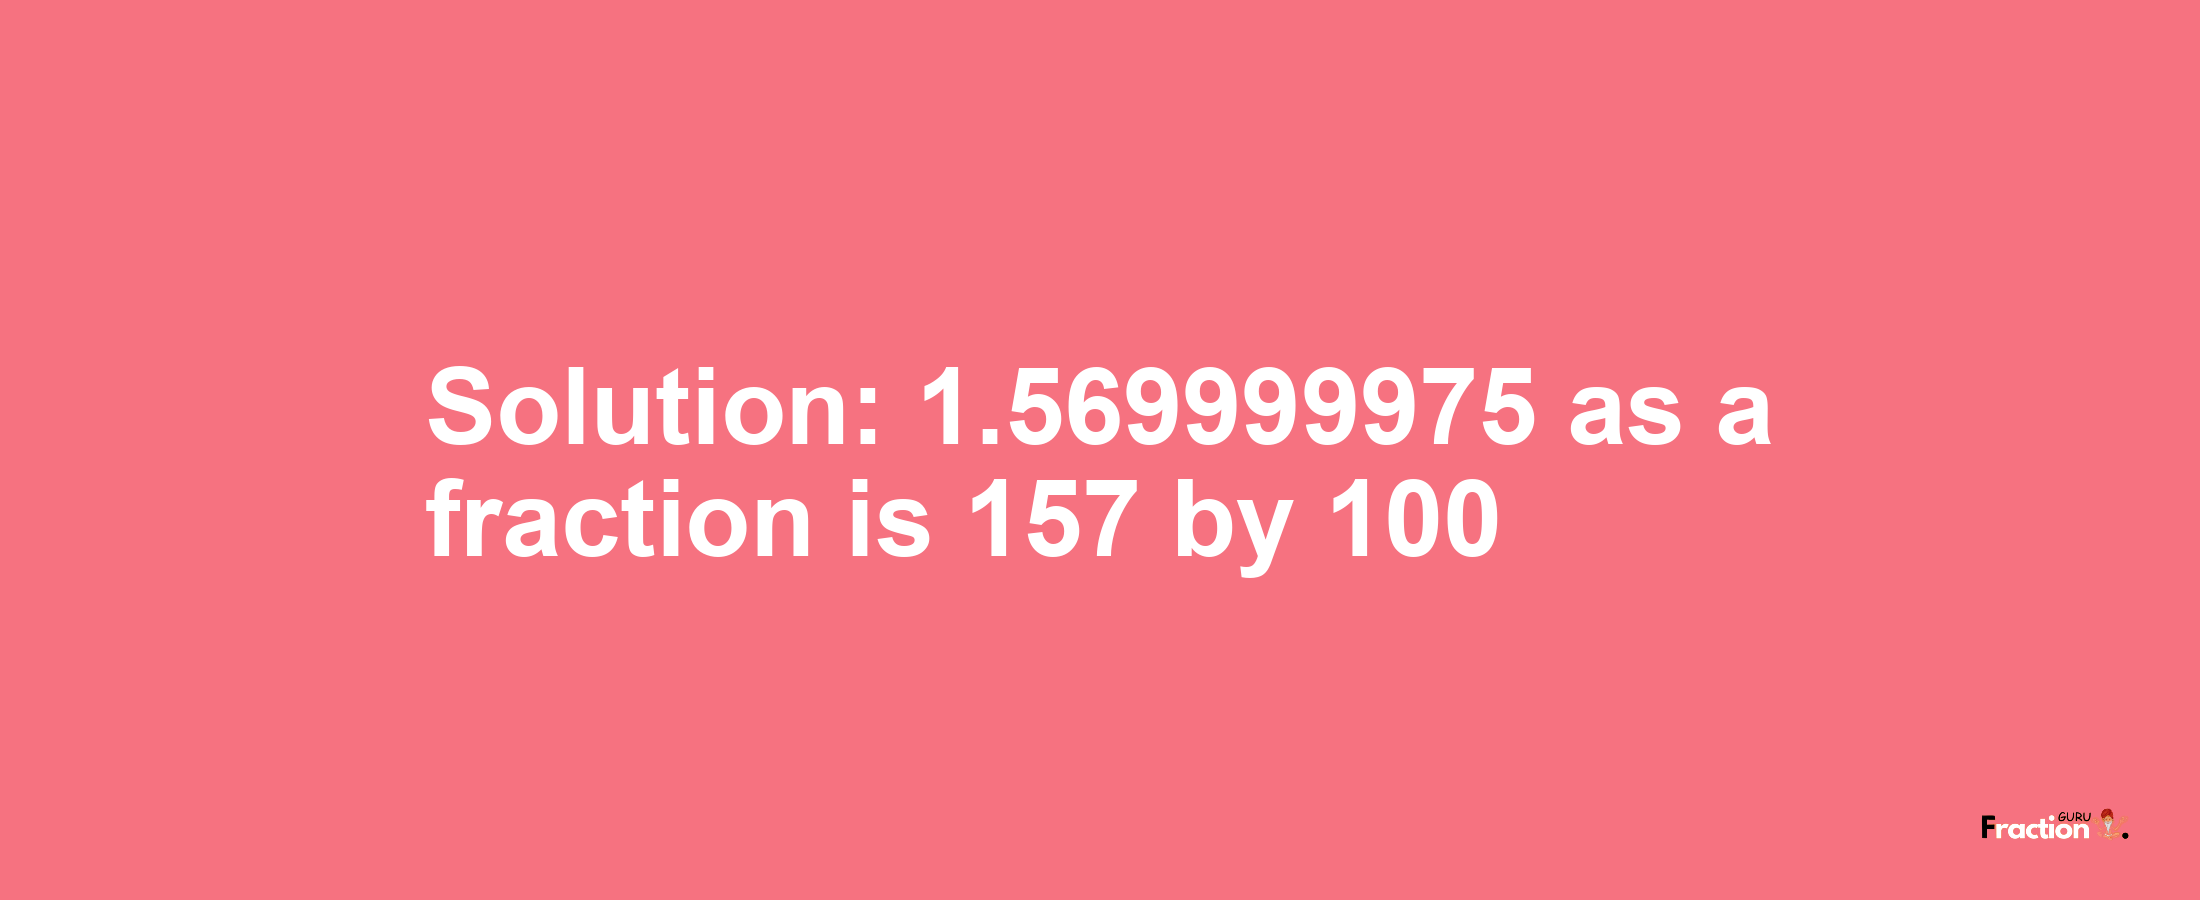 Solution:1.569999975 as a fraction is 157/100